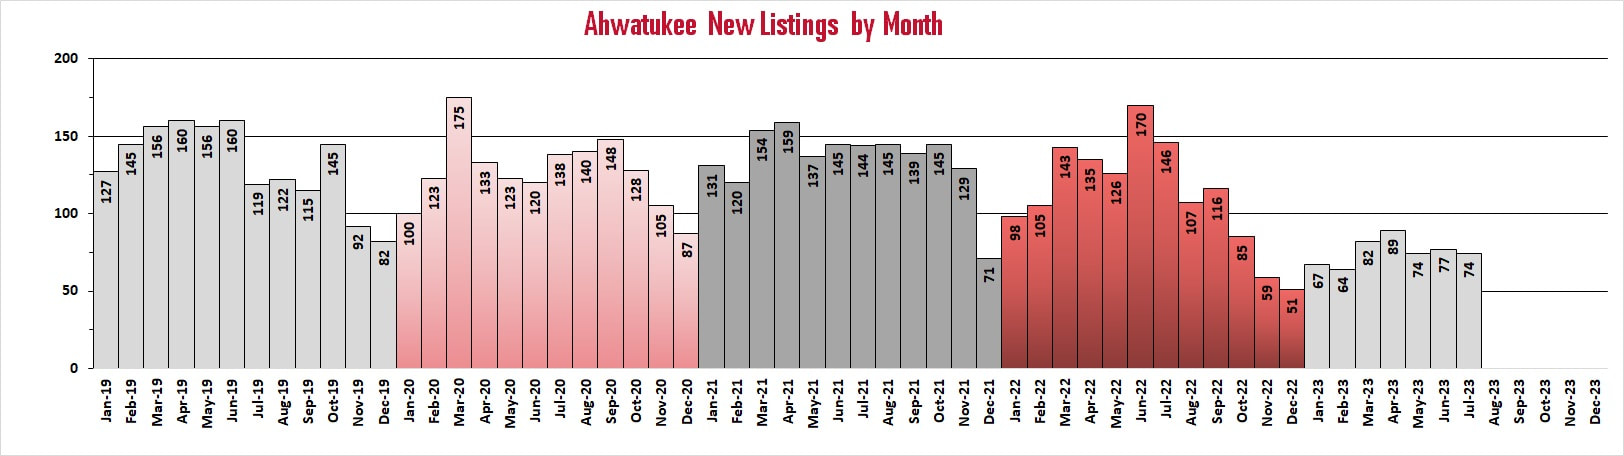 Ahwatukee Housing Market Reports - New Listings by Month | Troy Erickson Realtor